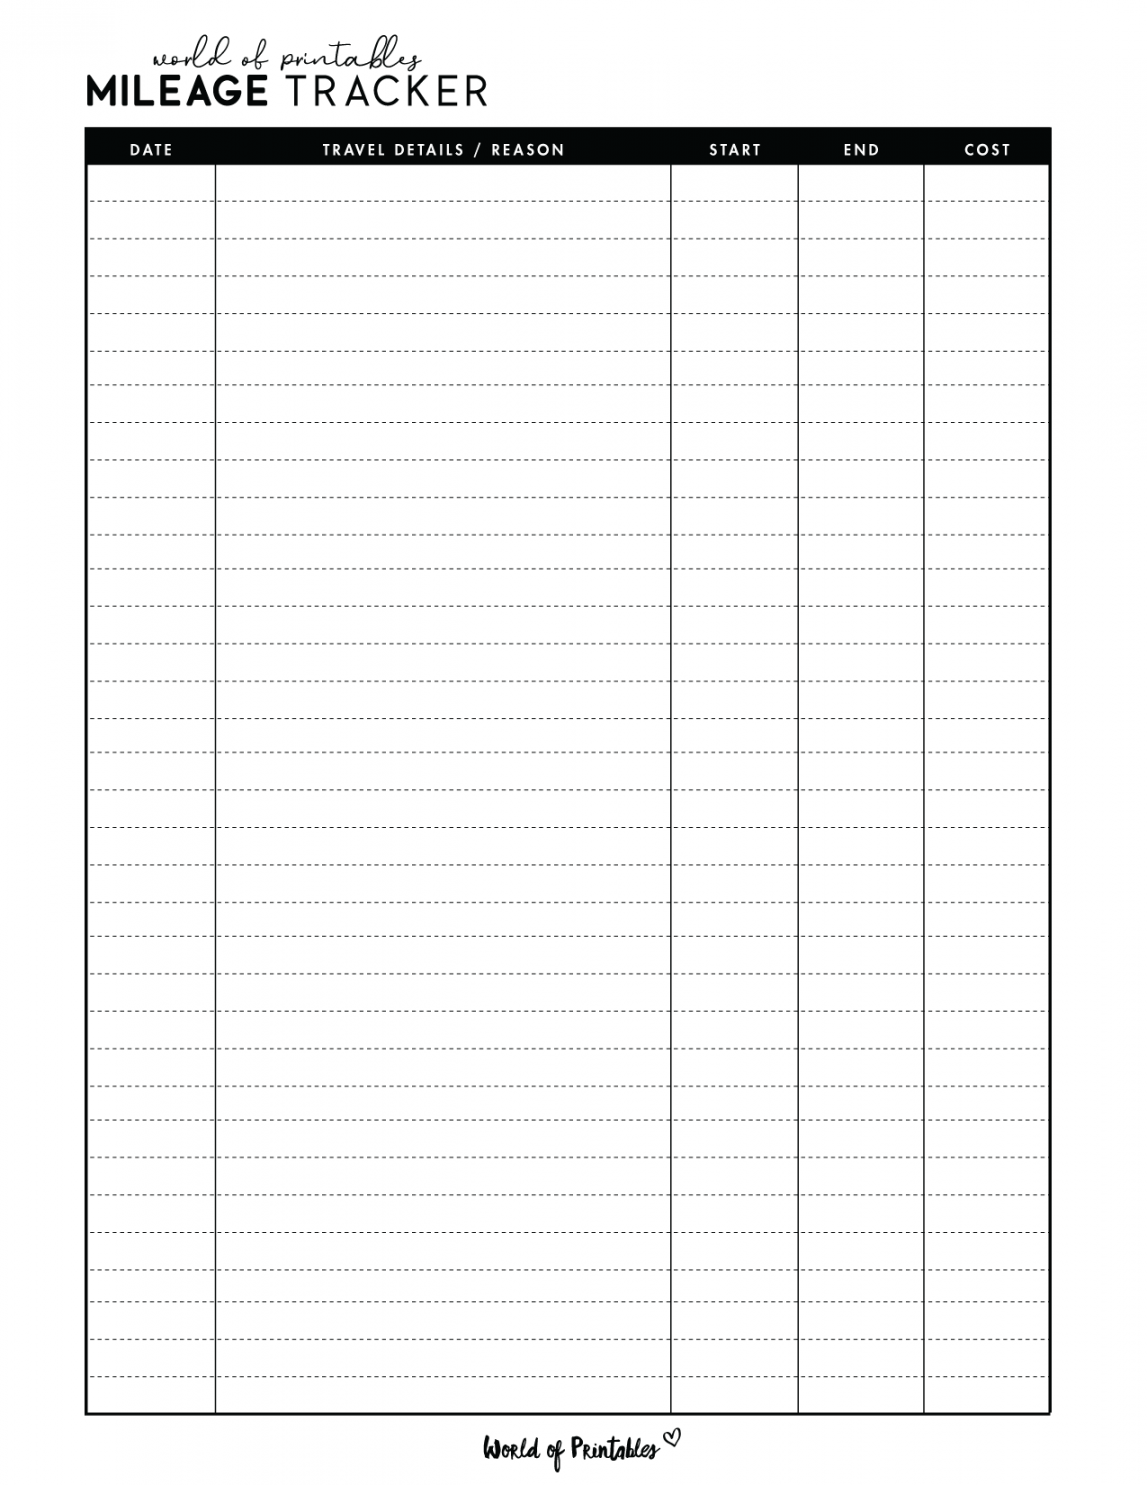 Mileage Log Templates -  Best Styles - World of Printables - FREE Printables - Free Printable Mileage Log